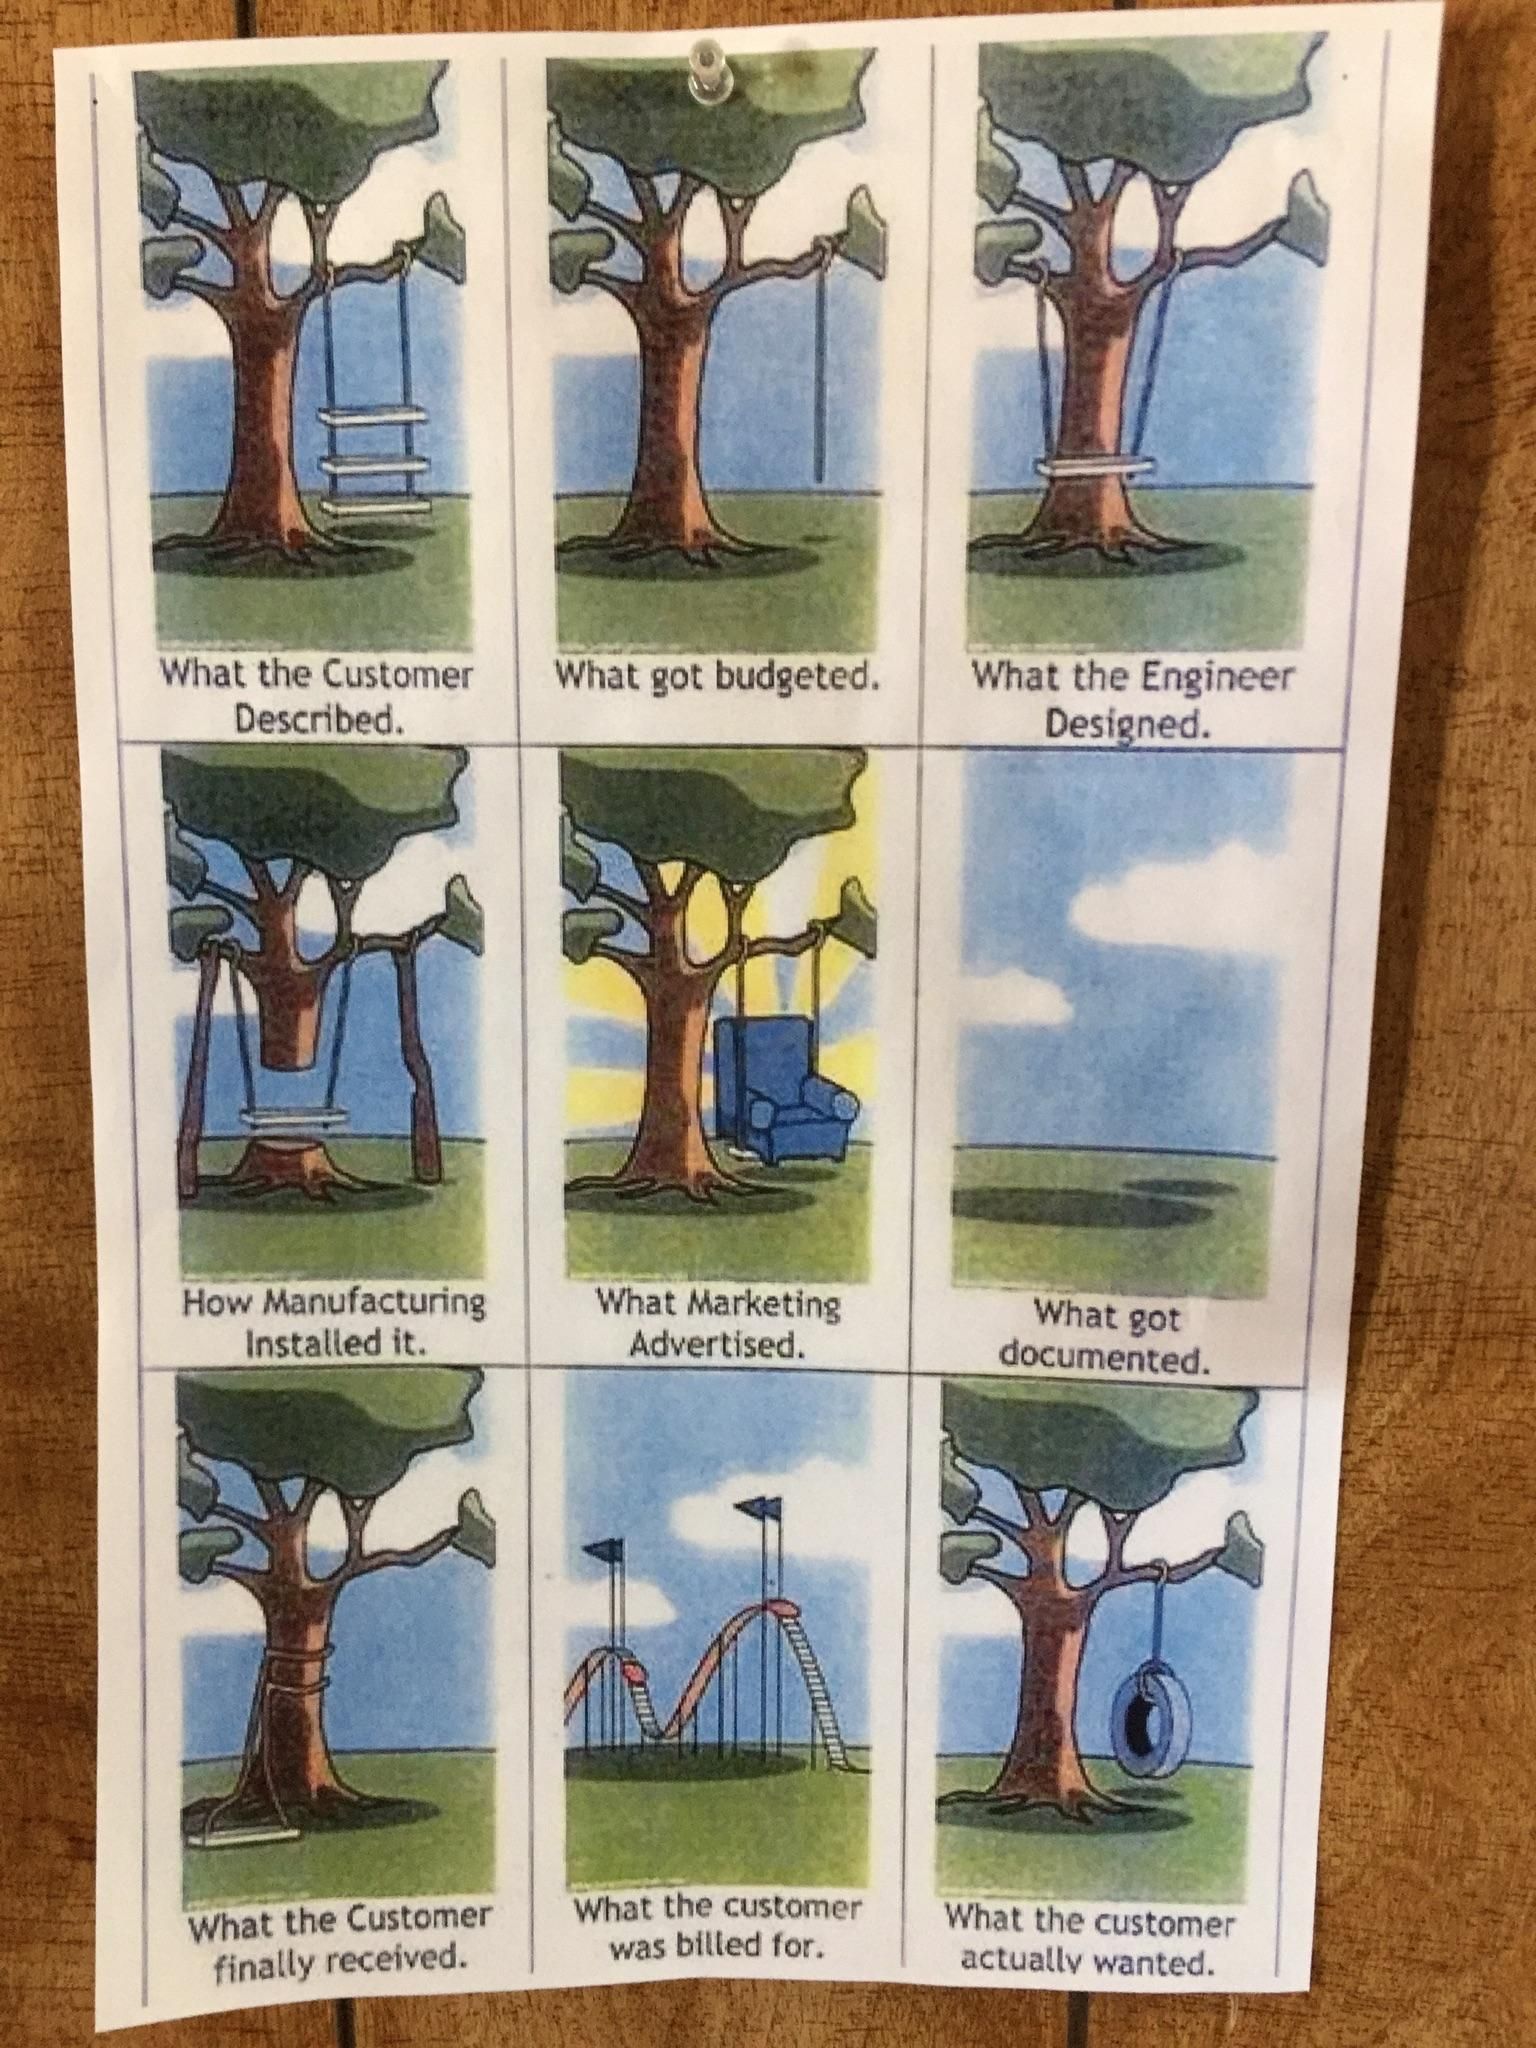 Engineers had this hanging up in their office